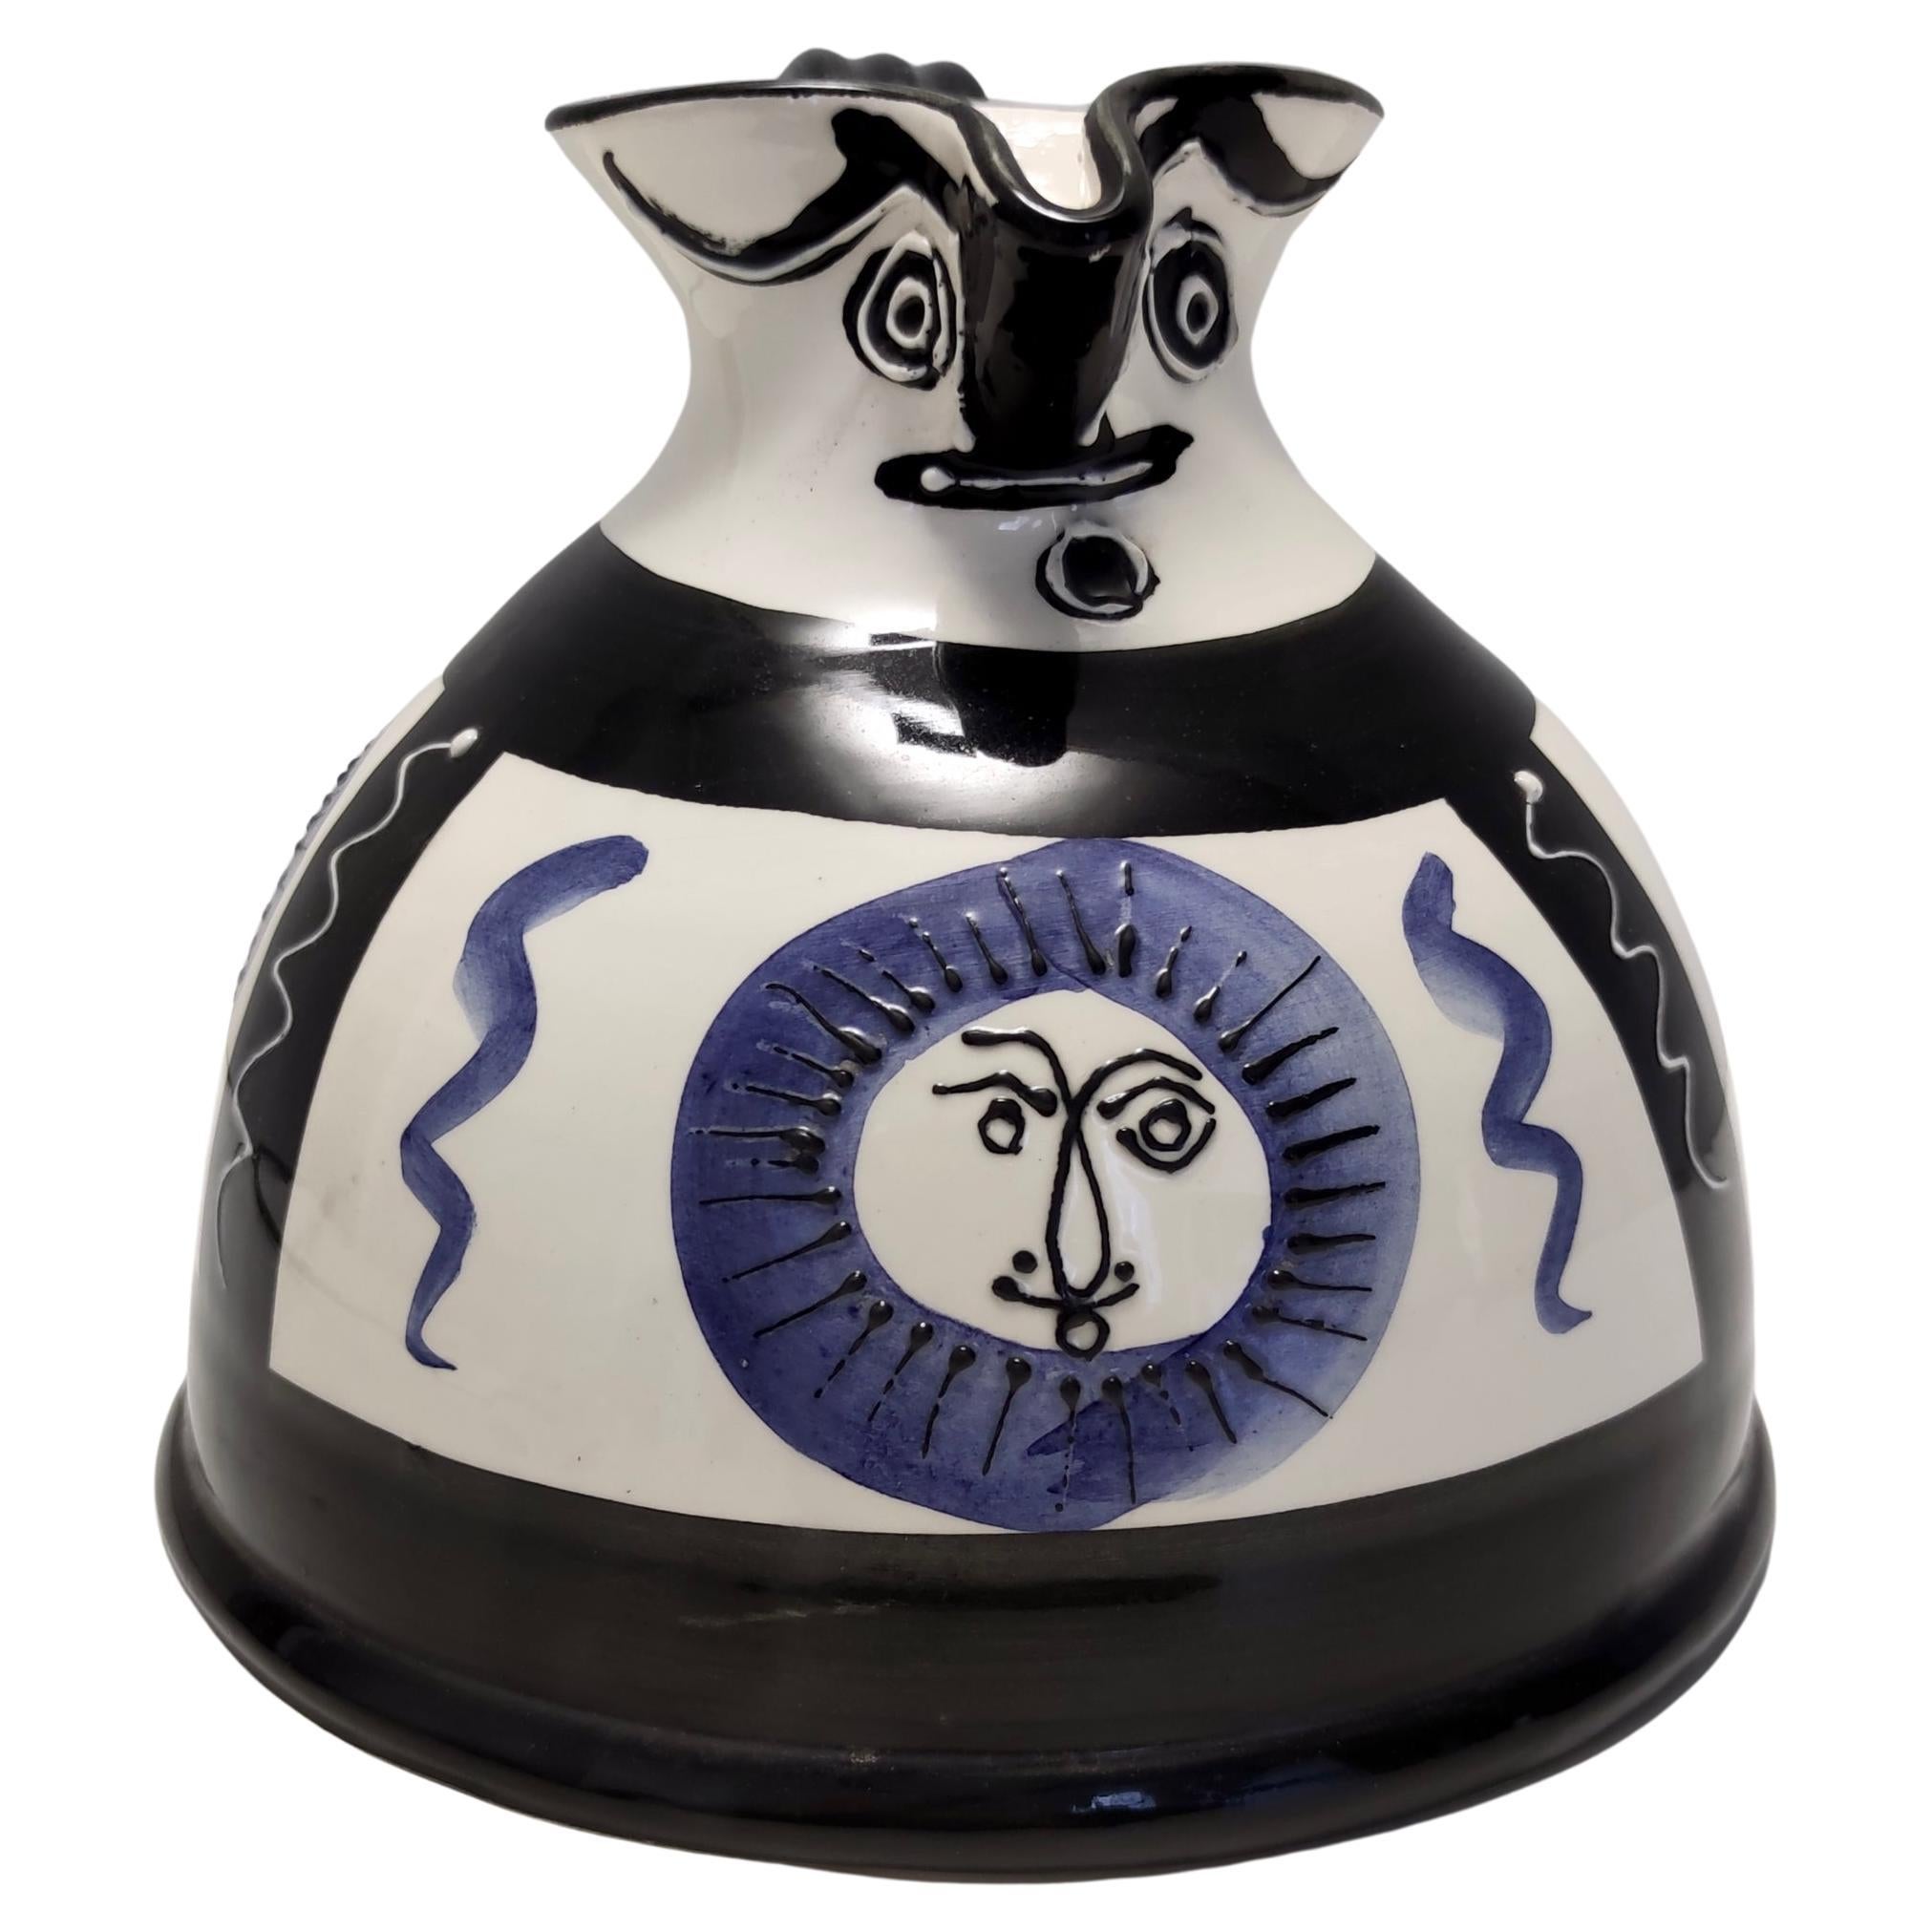 White, Black and Blue Hand-Painted Ceramic Jug / Vase in the Style of Picasso For Sale